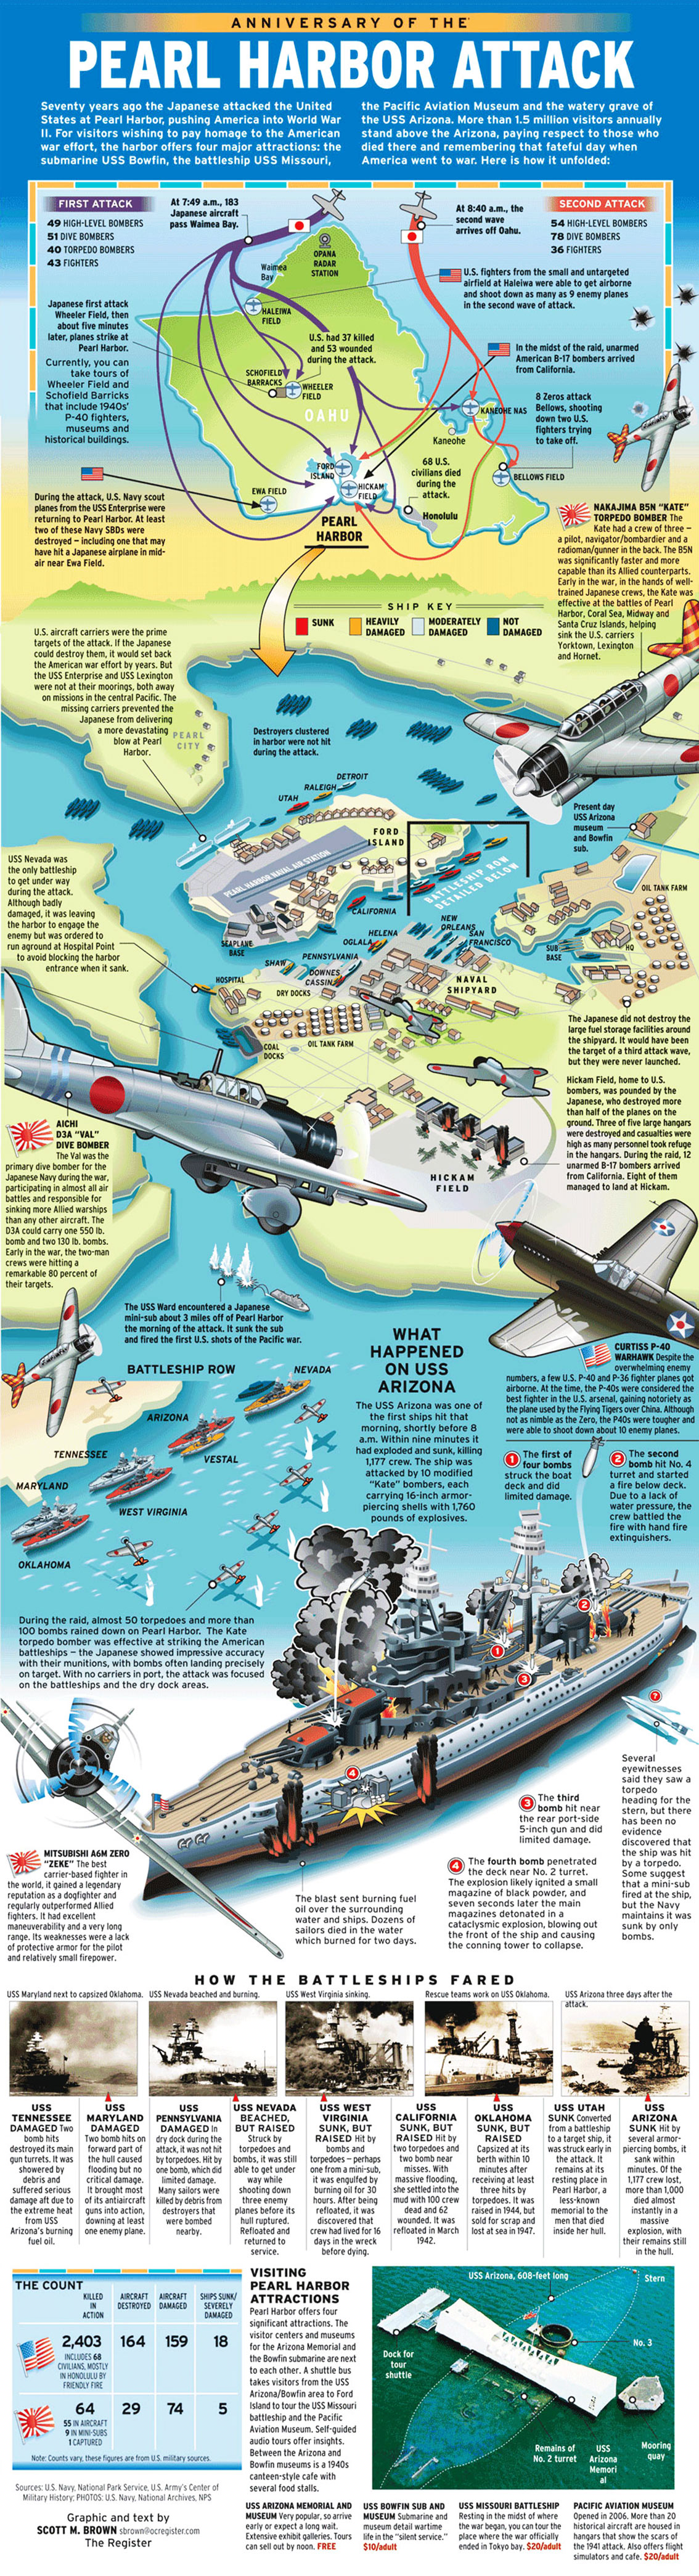 History of Pearl Harbor Attack of 1941 Infographic